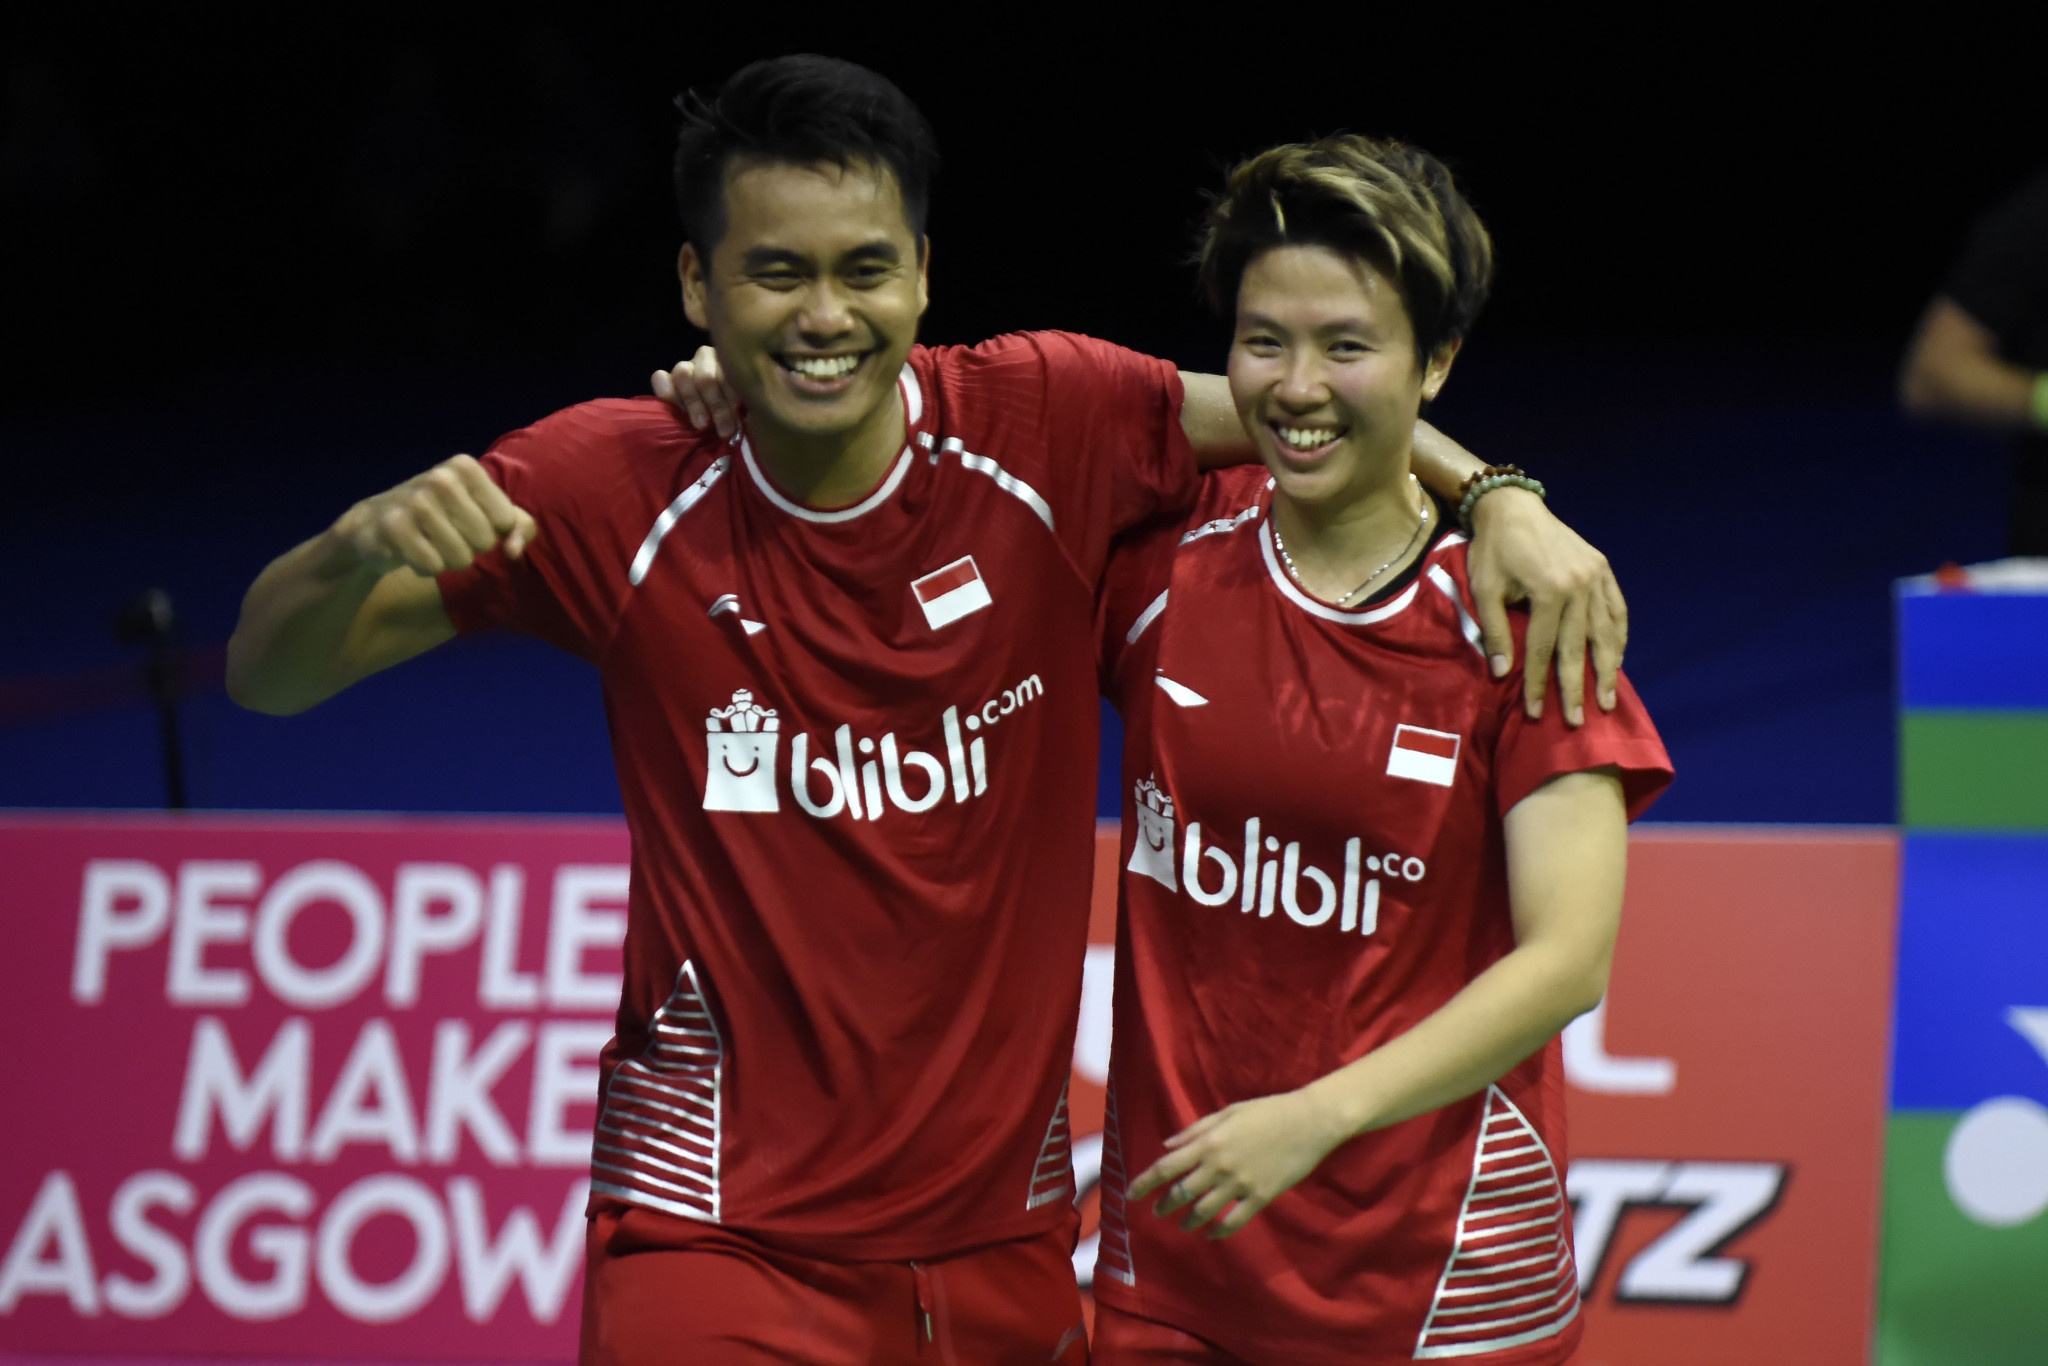 Indonesia's Tontowi Ahmad and Liliyana Natsir will be hoping to win the mixed doubles title on in their home tournament in Jakarta ©Getty Images